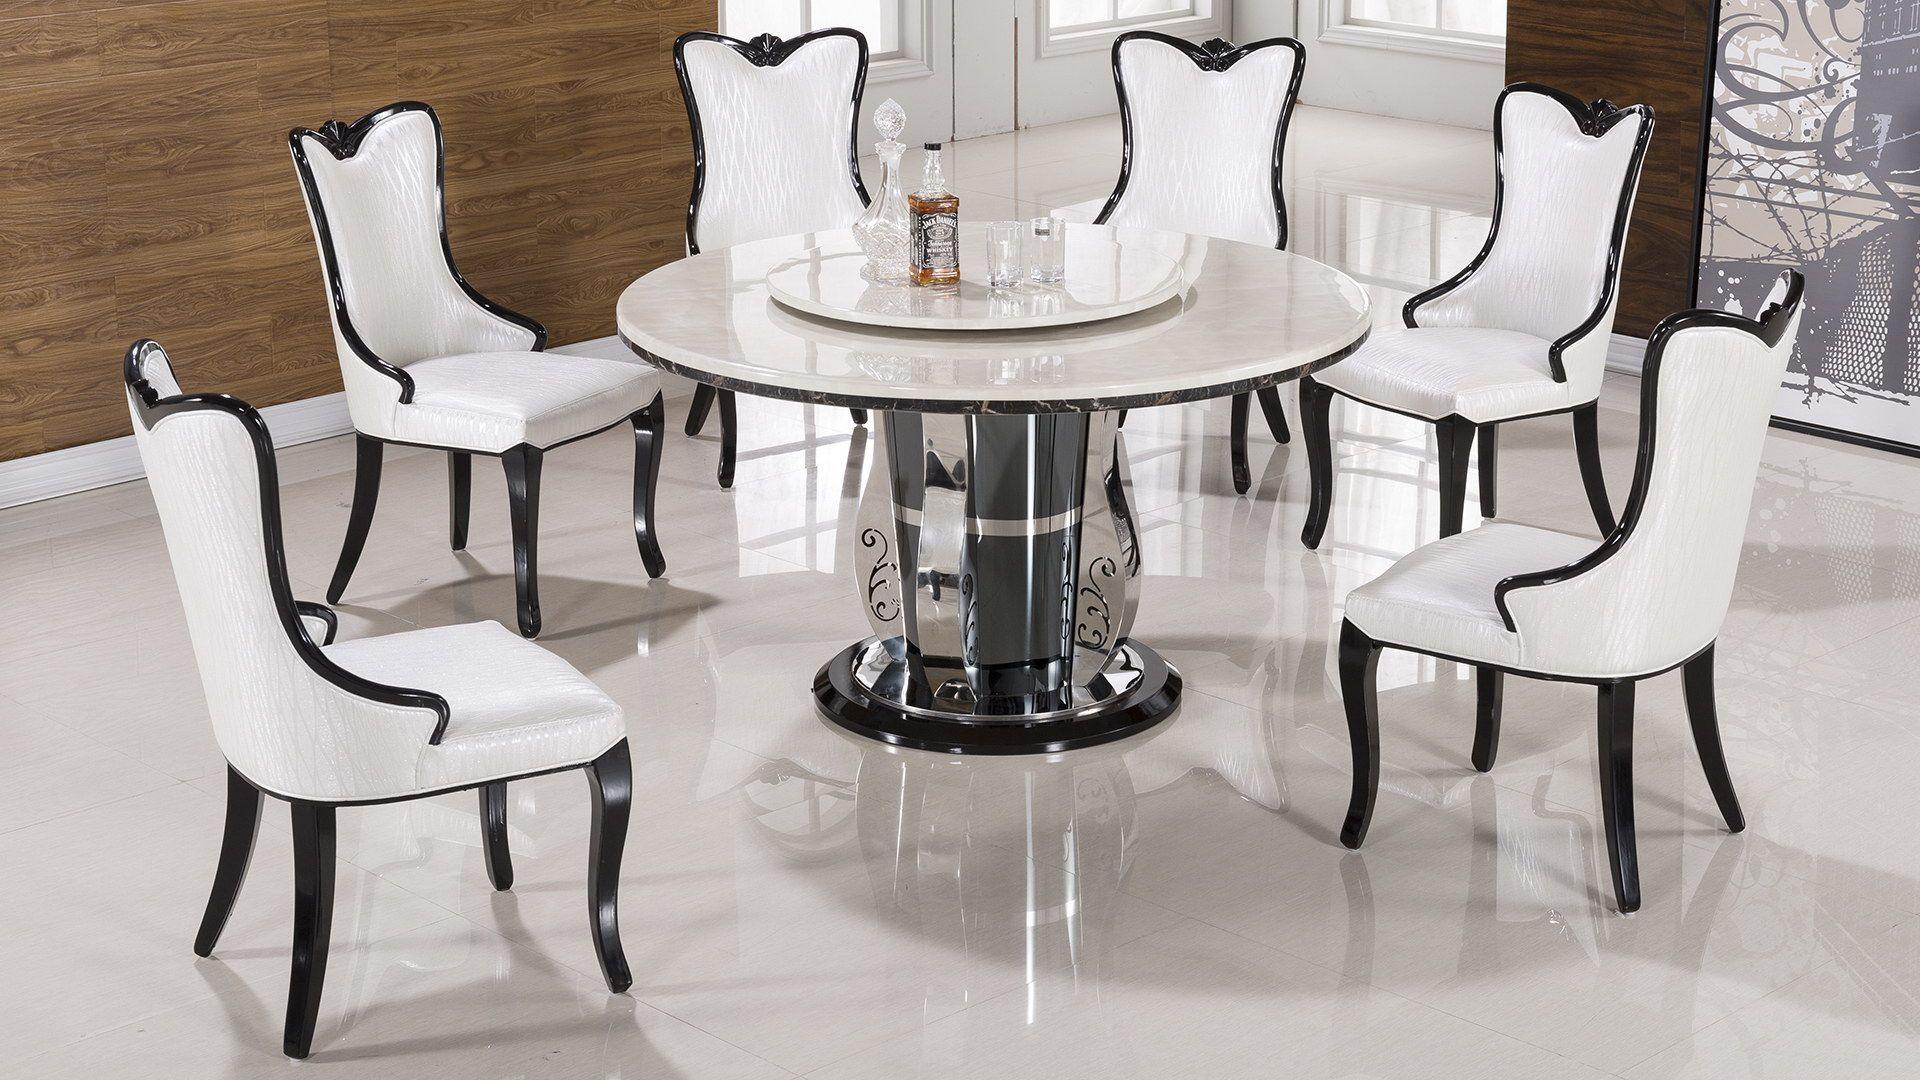 Modern Dining Sets DT-H62 / CK-H1336-W DT-H62-5PC in Ivory, White PU